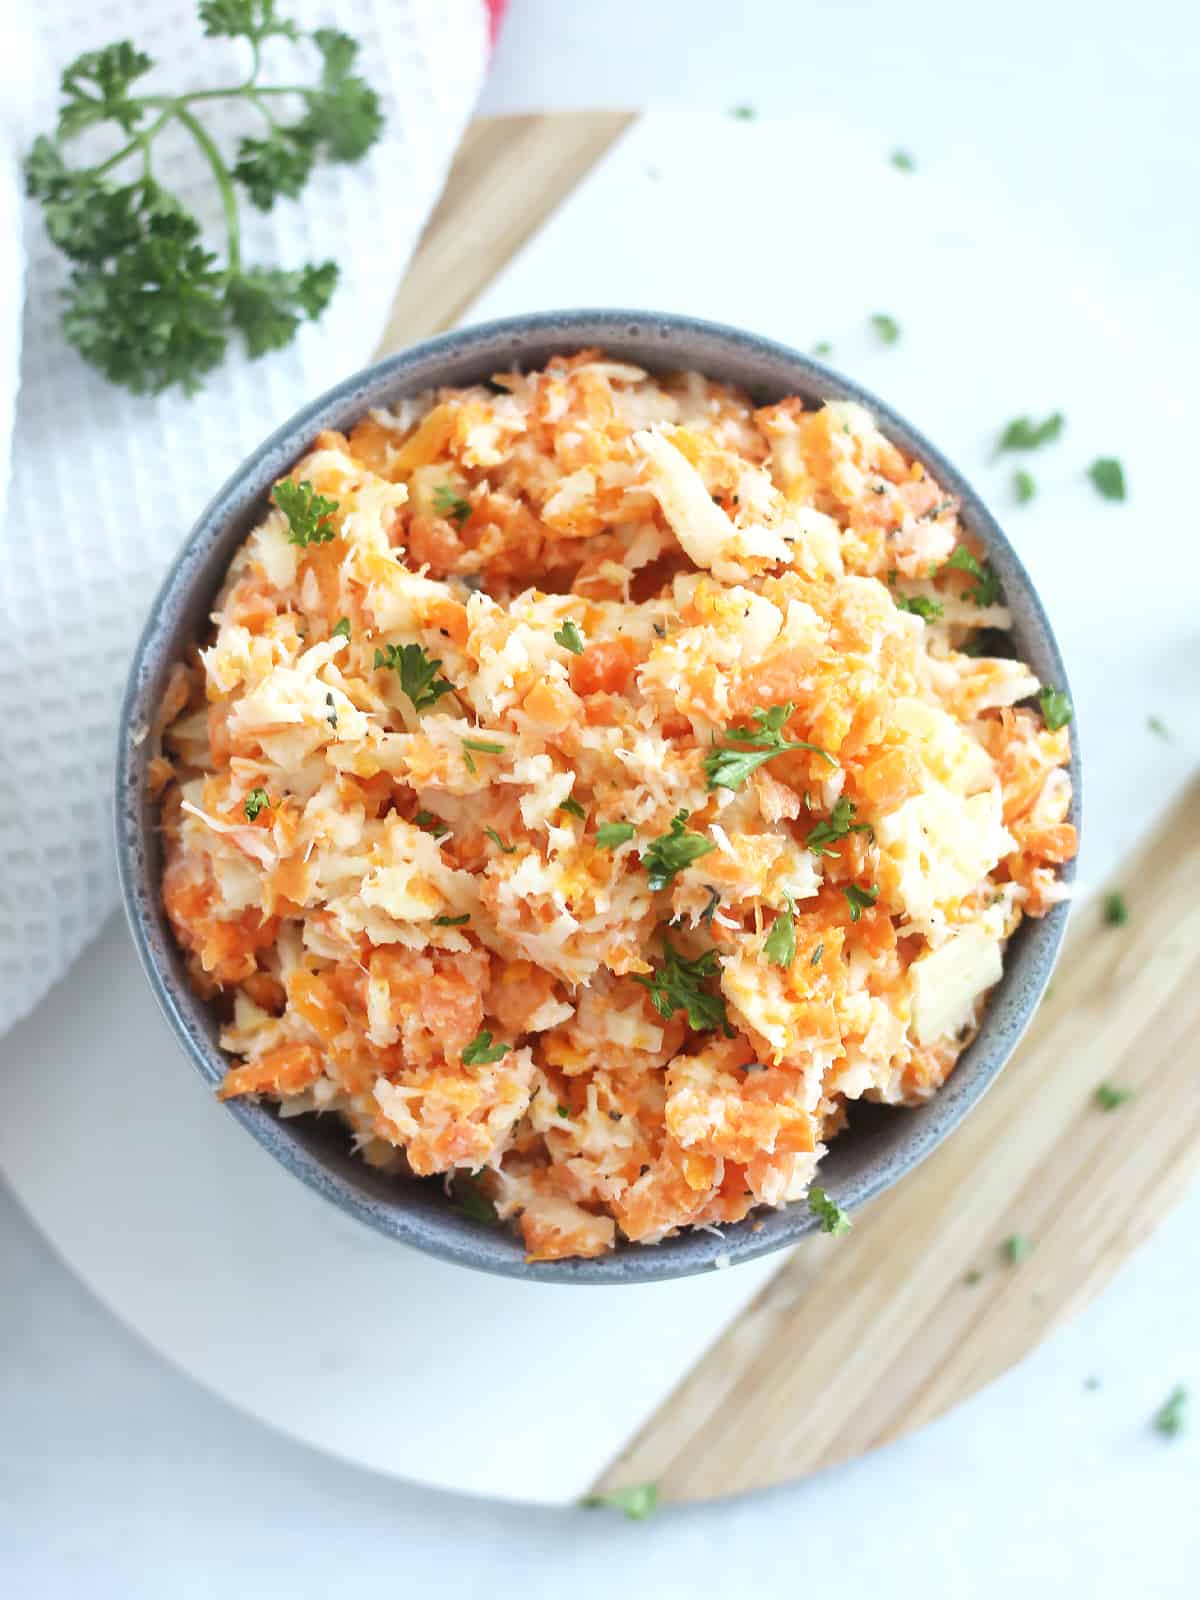 Mashed Carrot and Parsnip Recipe